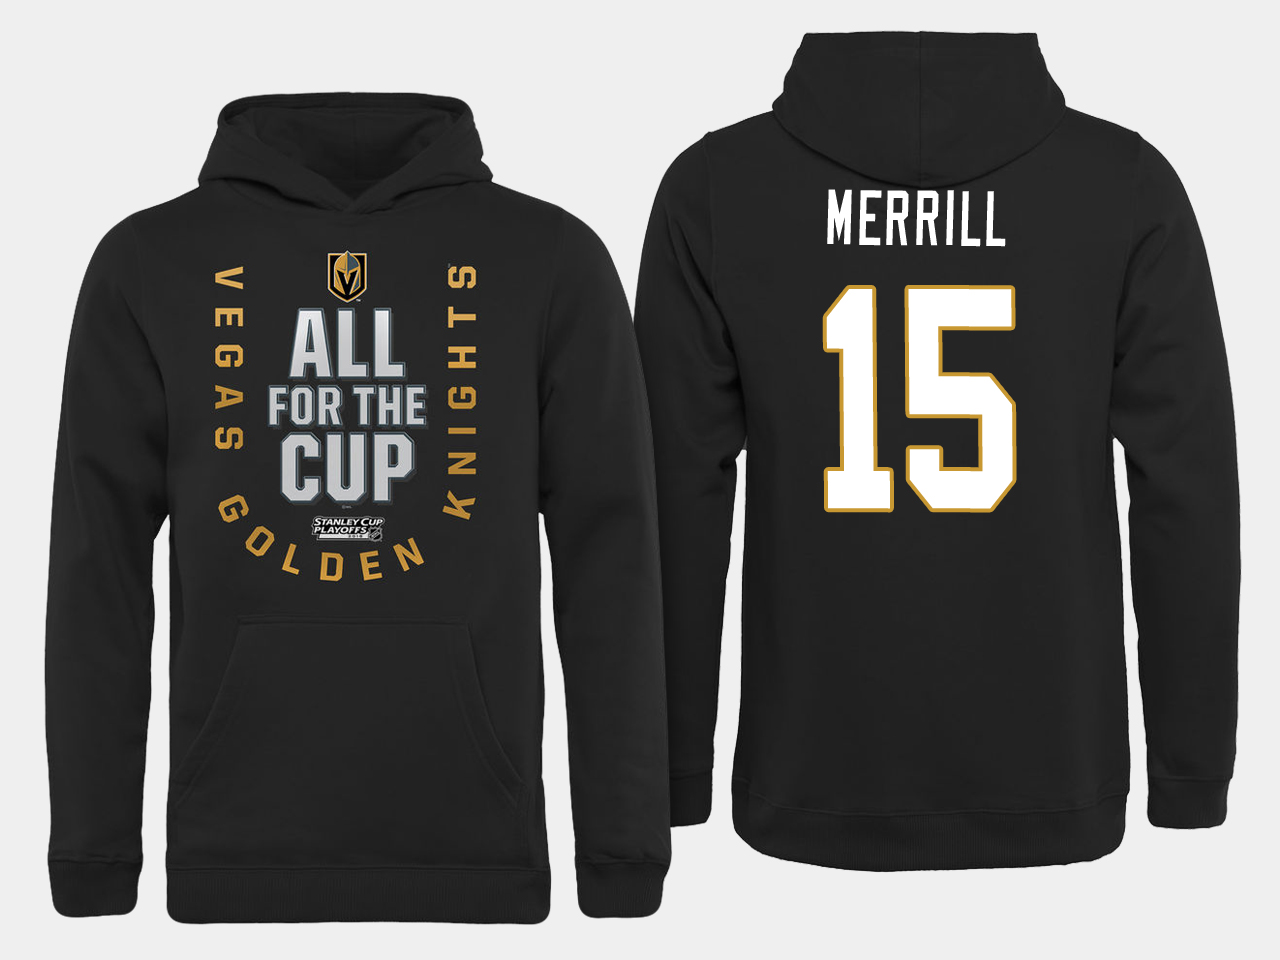 Men NHL Vegas Golden Knights 15 Merrill All for the Cup hoodie